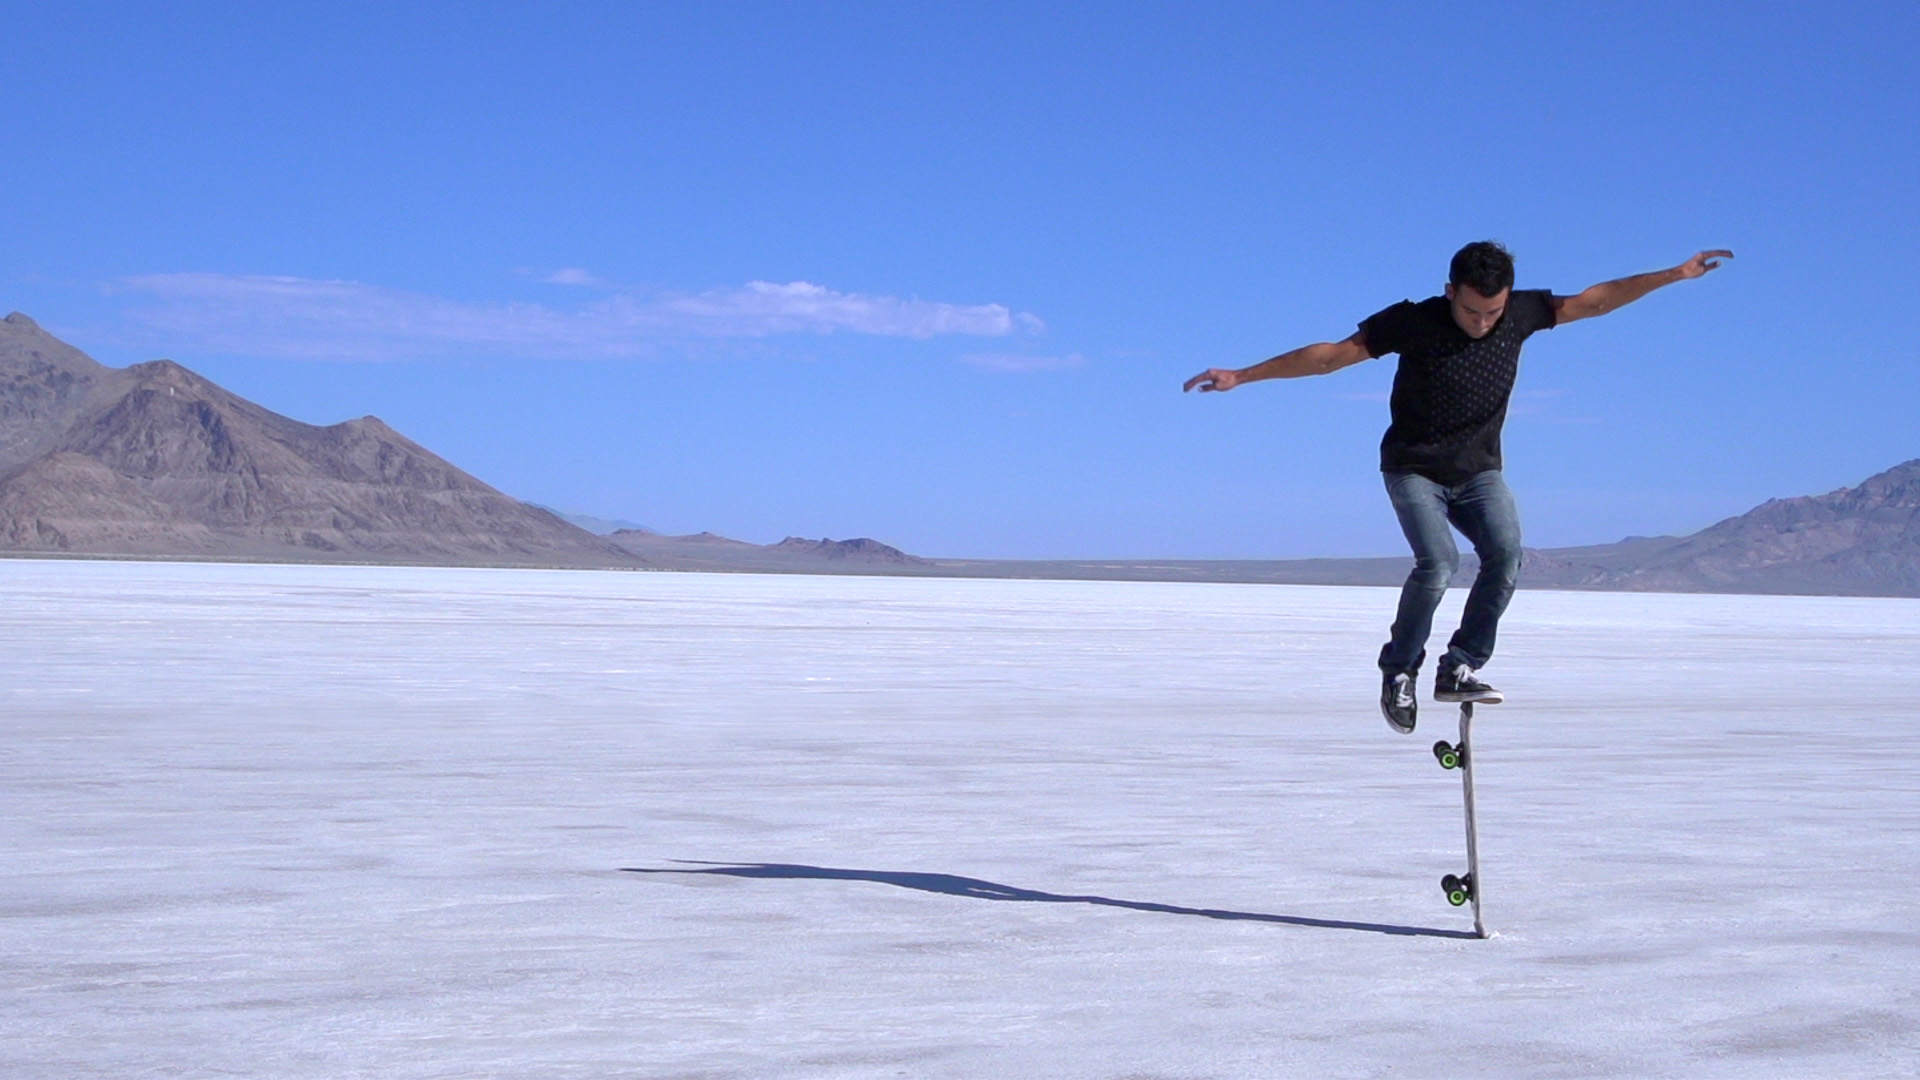 Kilian Martin Proves Anything is Skateable In Stunning ‘Searching Sirocco’ Video